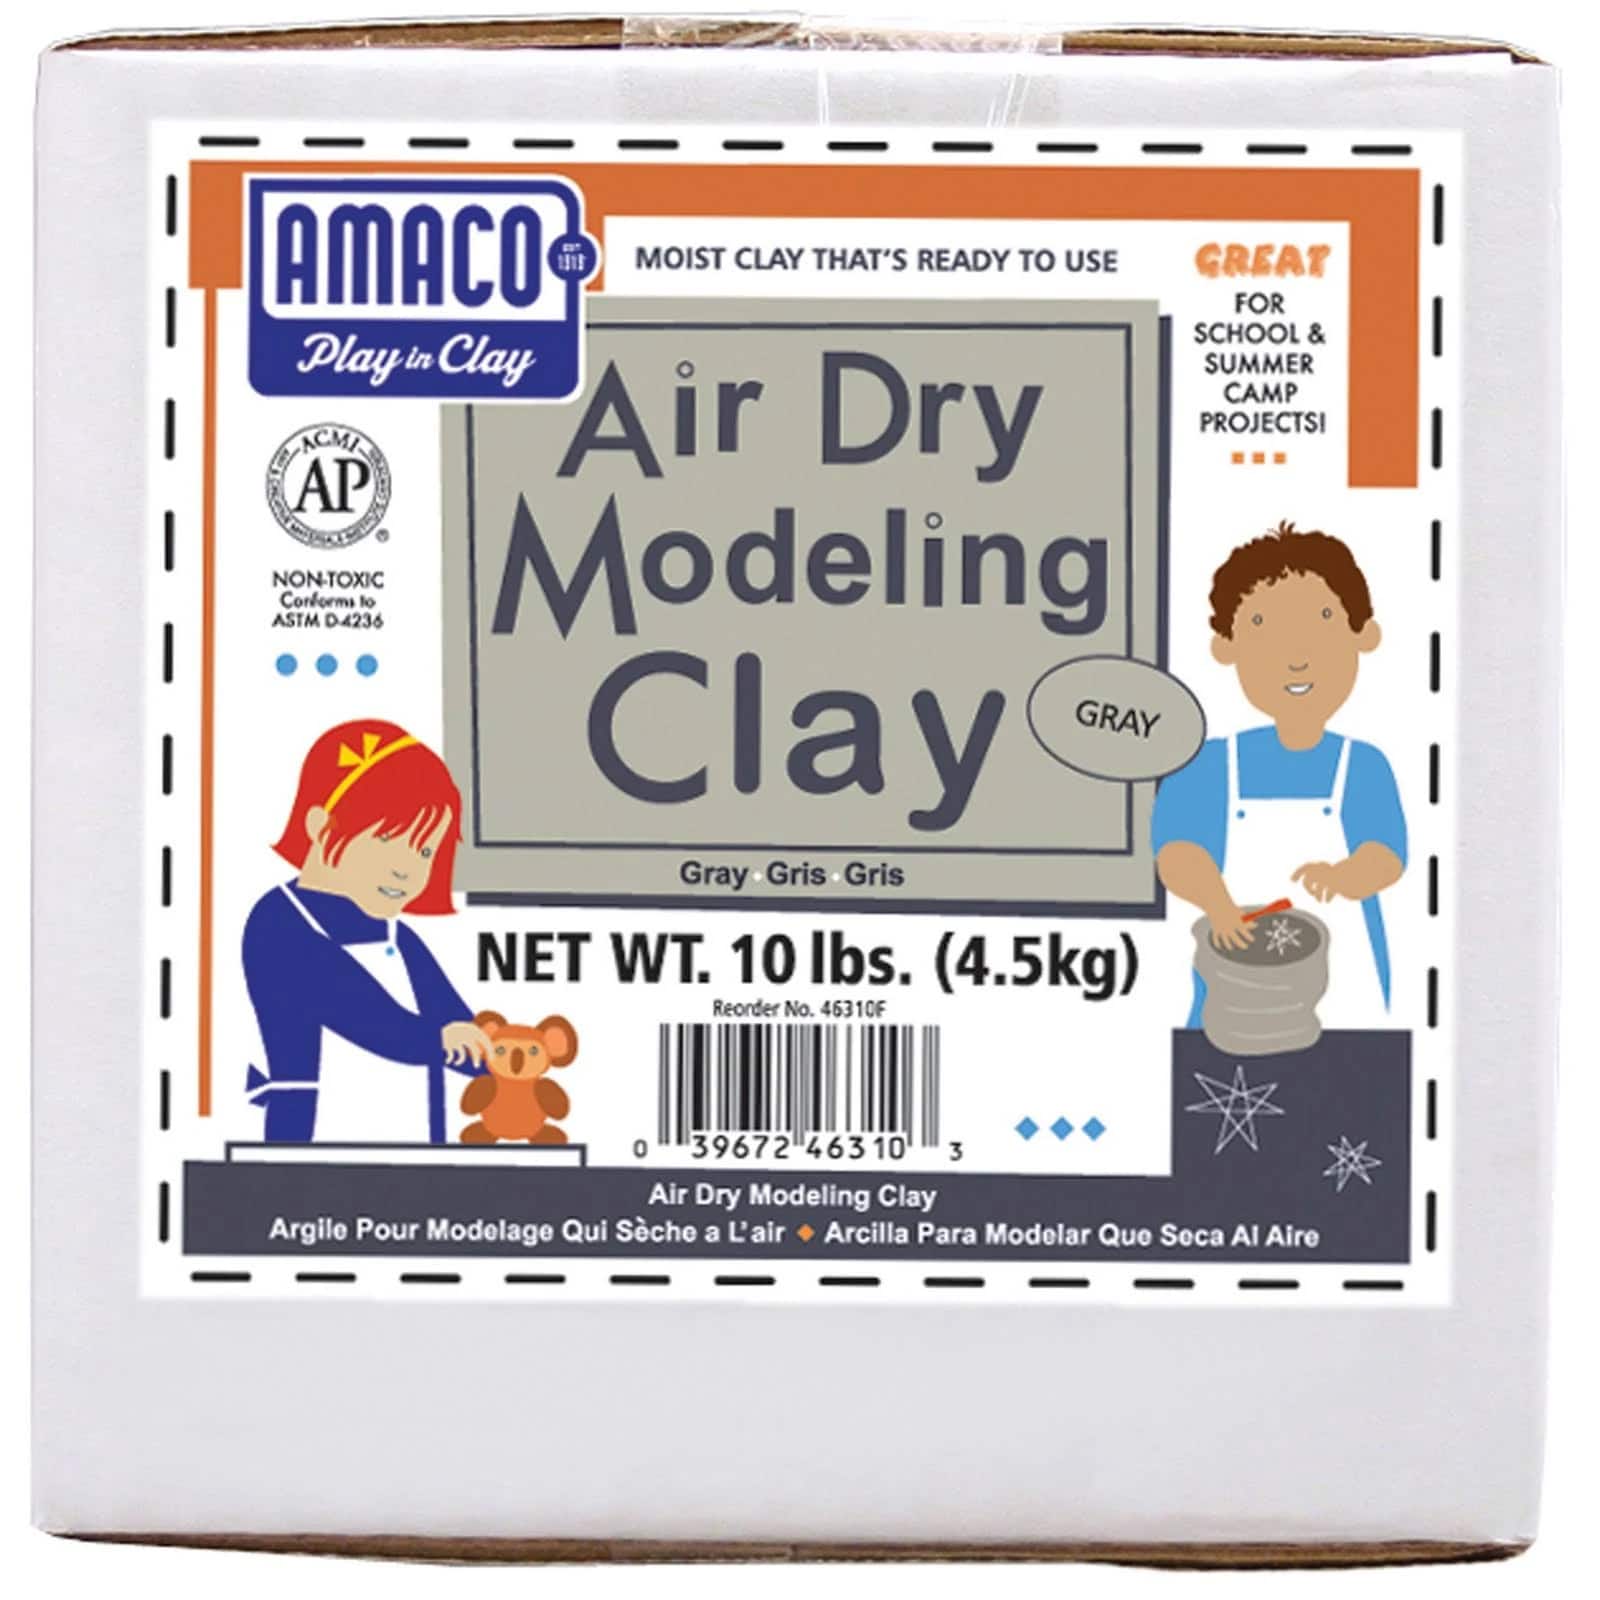 10lb. Amaco Air Dry Modeling Clay